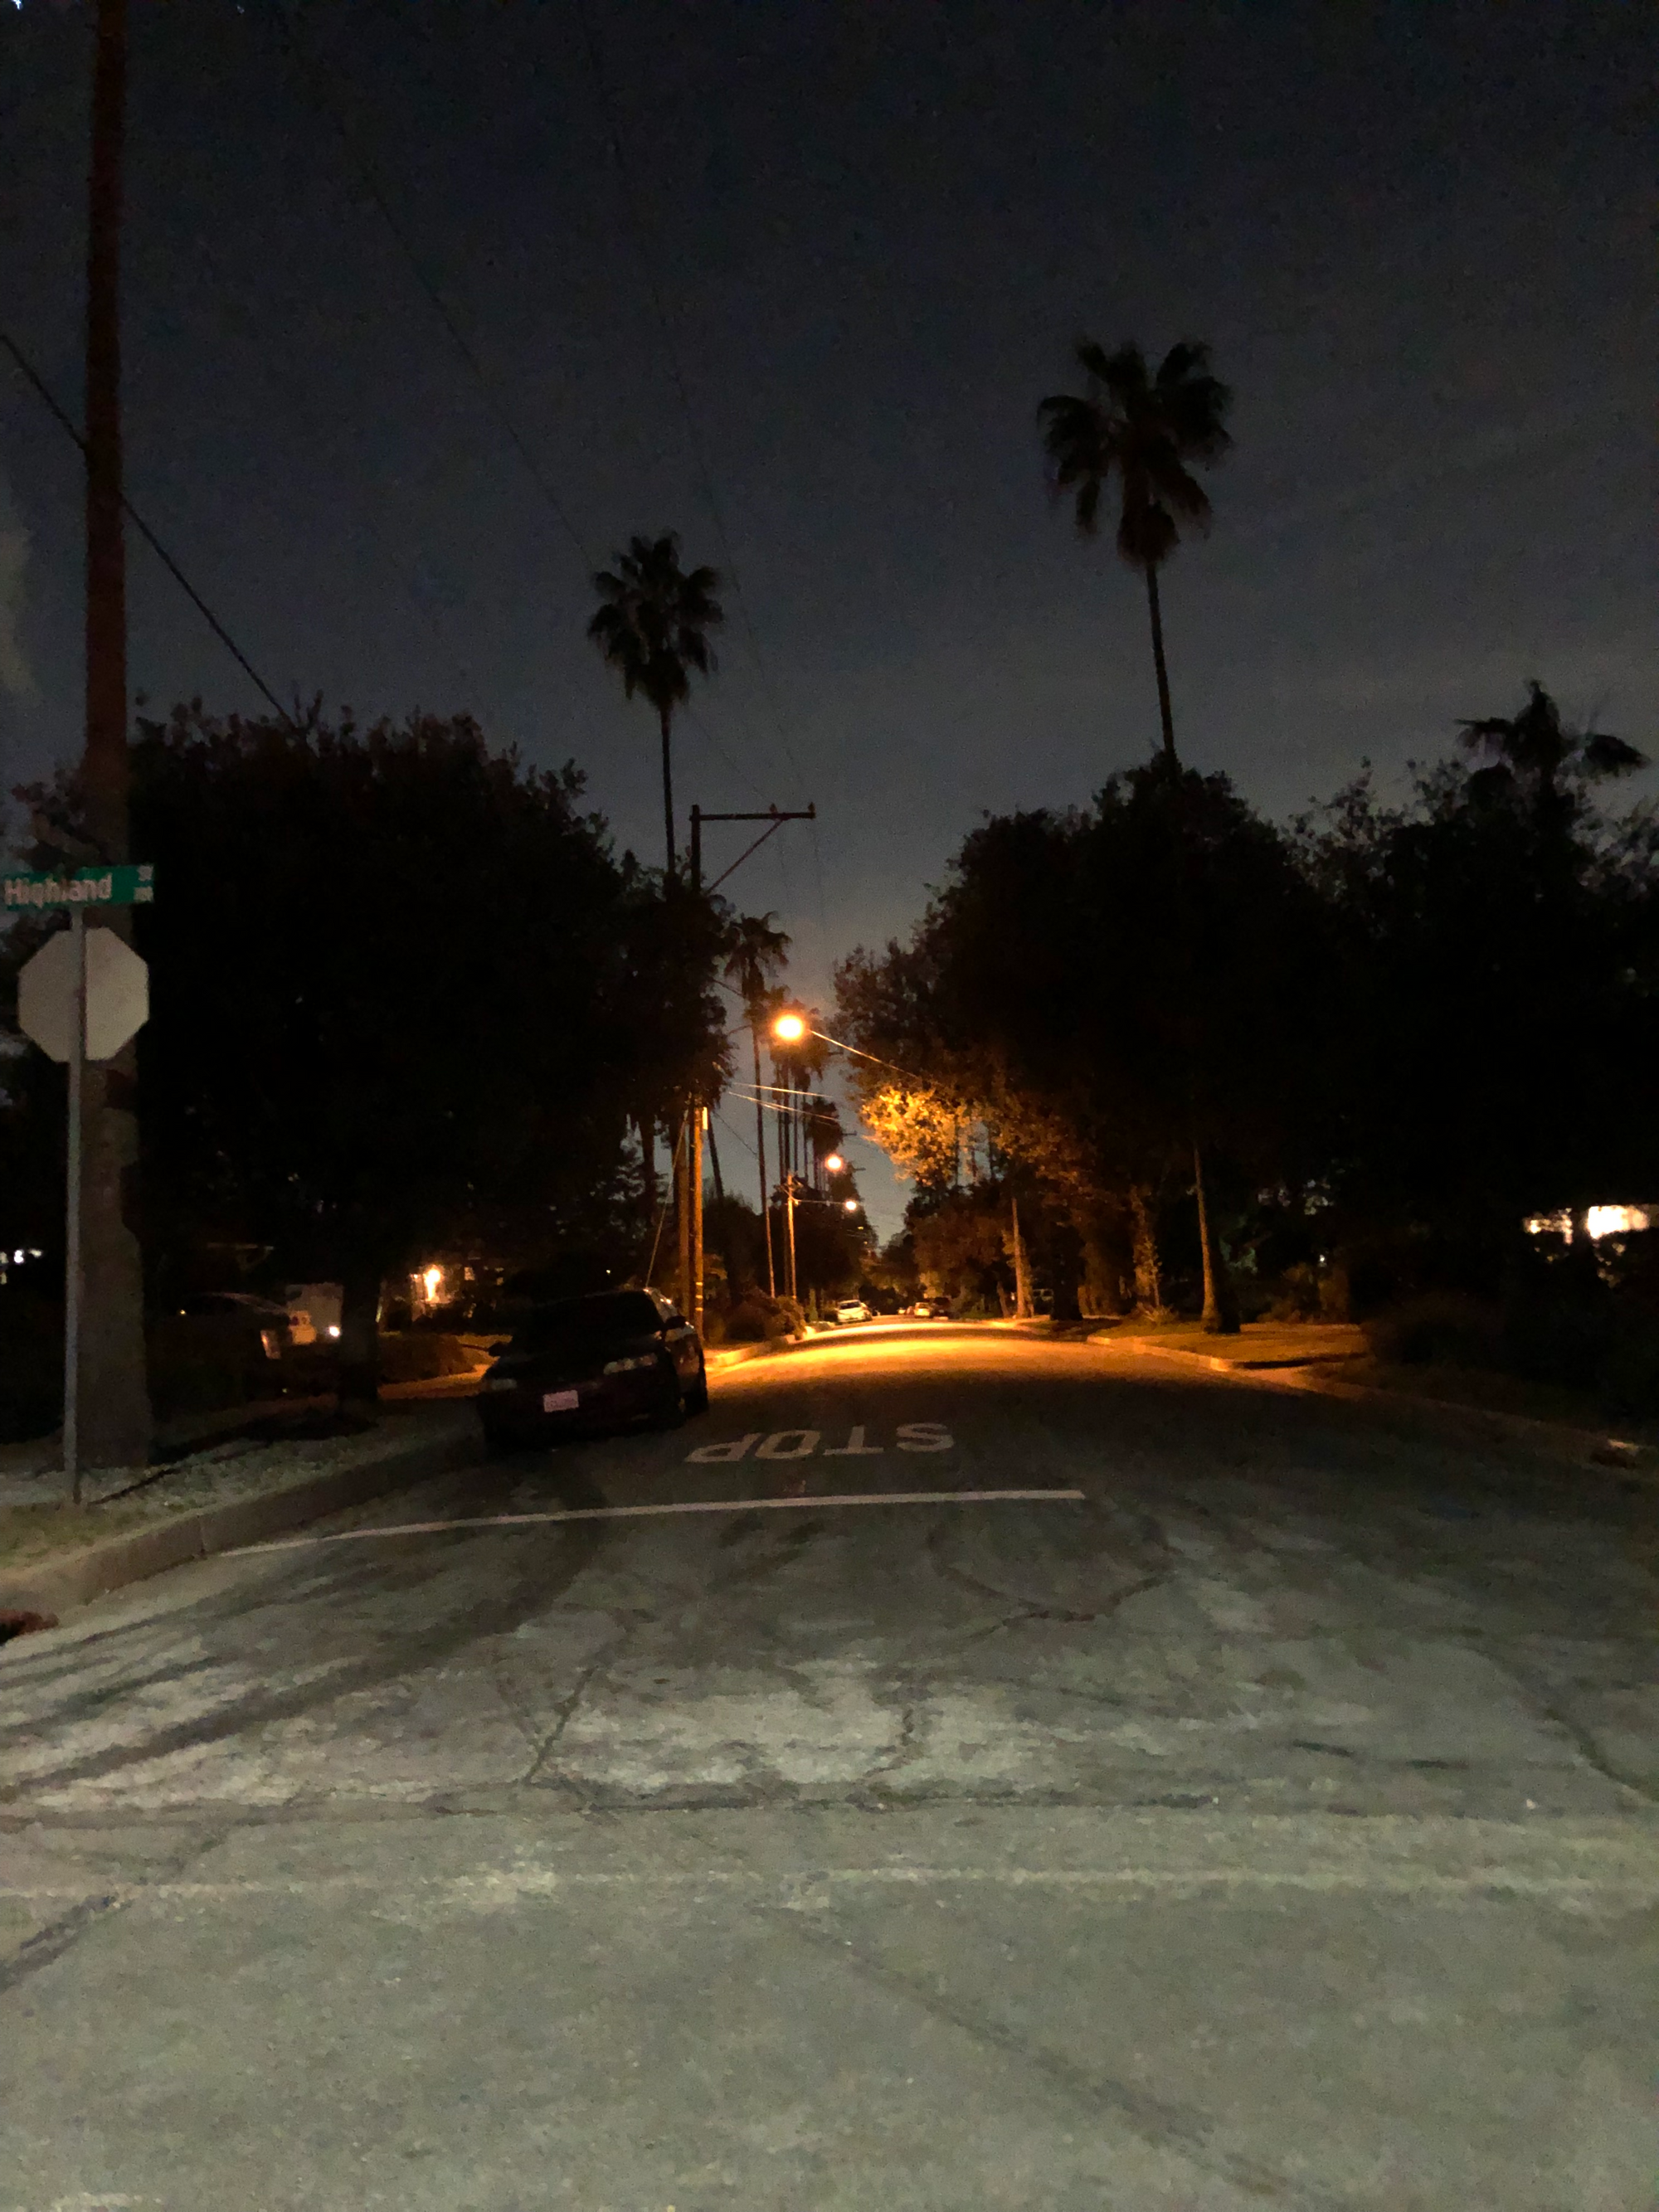 night shot of some street in robledo off of Highland Street, the street sign on the left edge of the frame. flash illuminates the asphalt in the foreground which darkens and yellows into the distance under scattered streetlights and silhouettes of palm trees. taken near the robledo art, strike headquarters, february 2023.